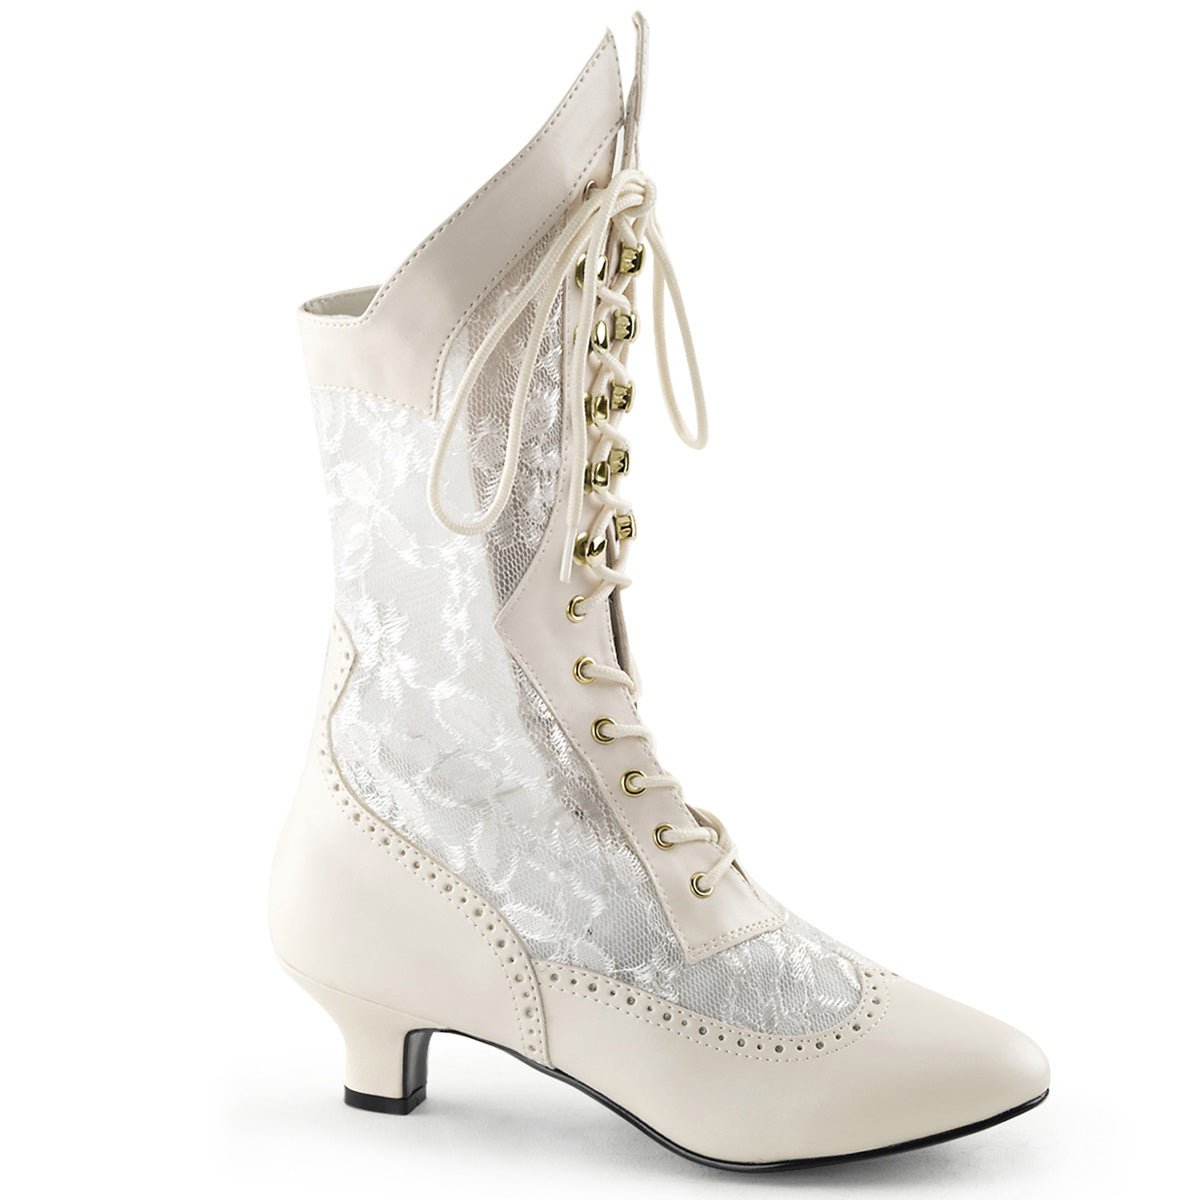 Clearance Funtasma DAME 115 Ivory Size 3UK/6USA - From Clearance Sold By Alternative Footwear